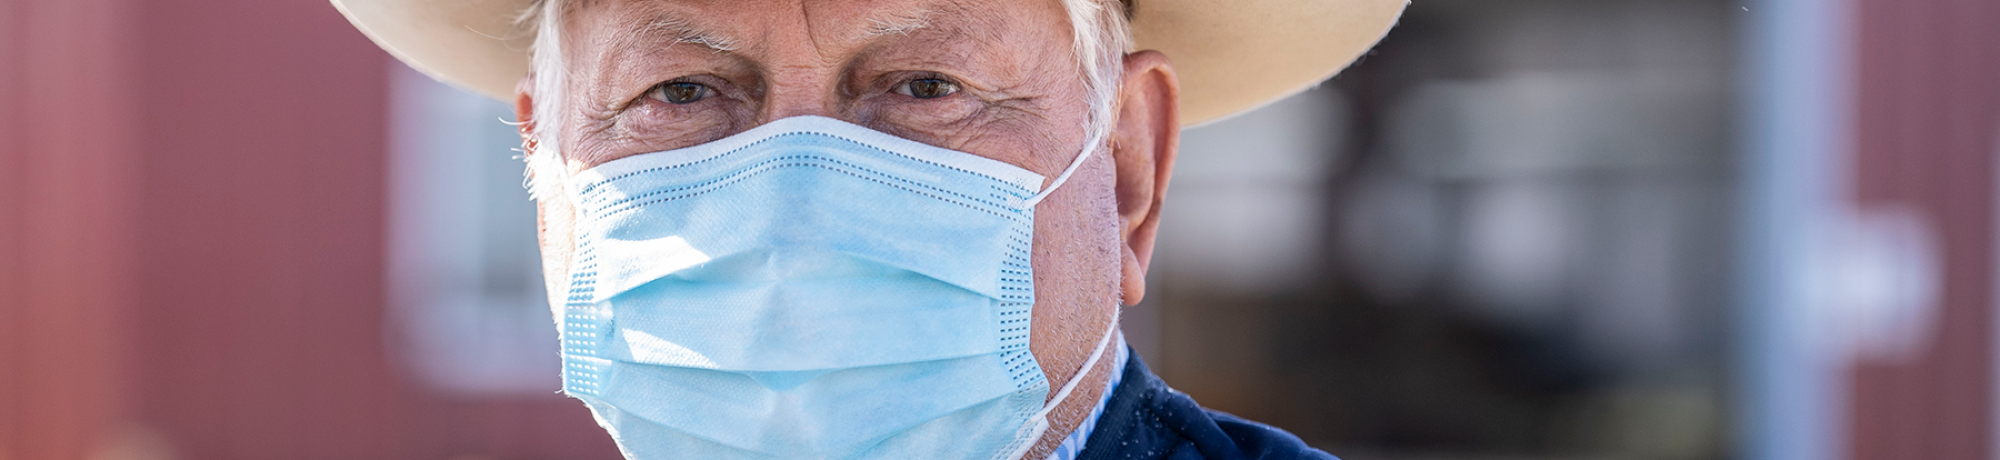 A farmer wears a cowboy hat and a surgical mask